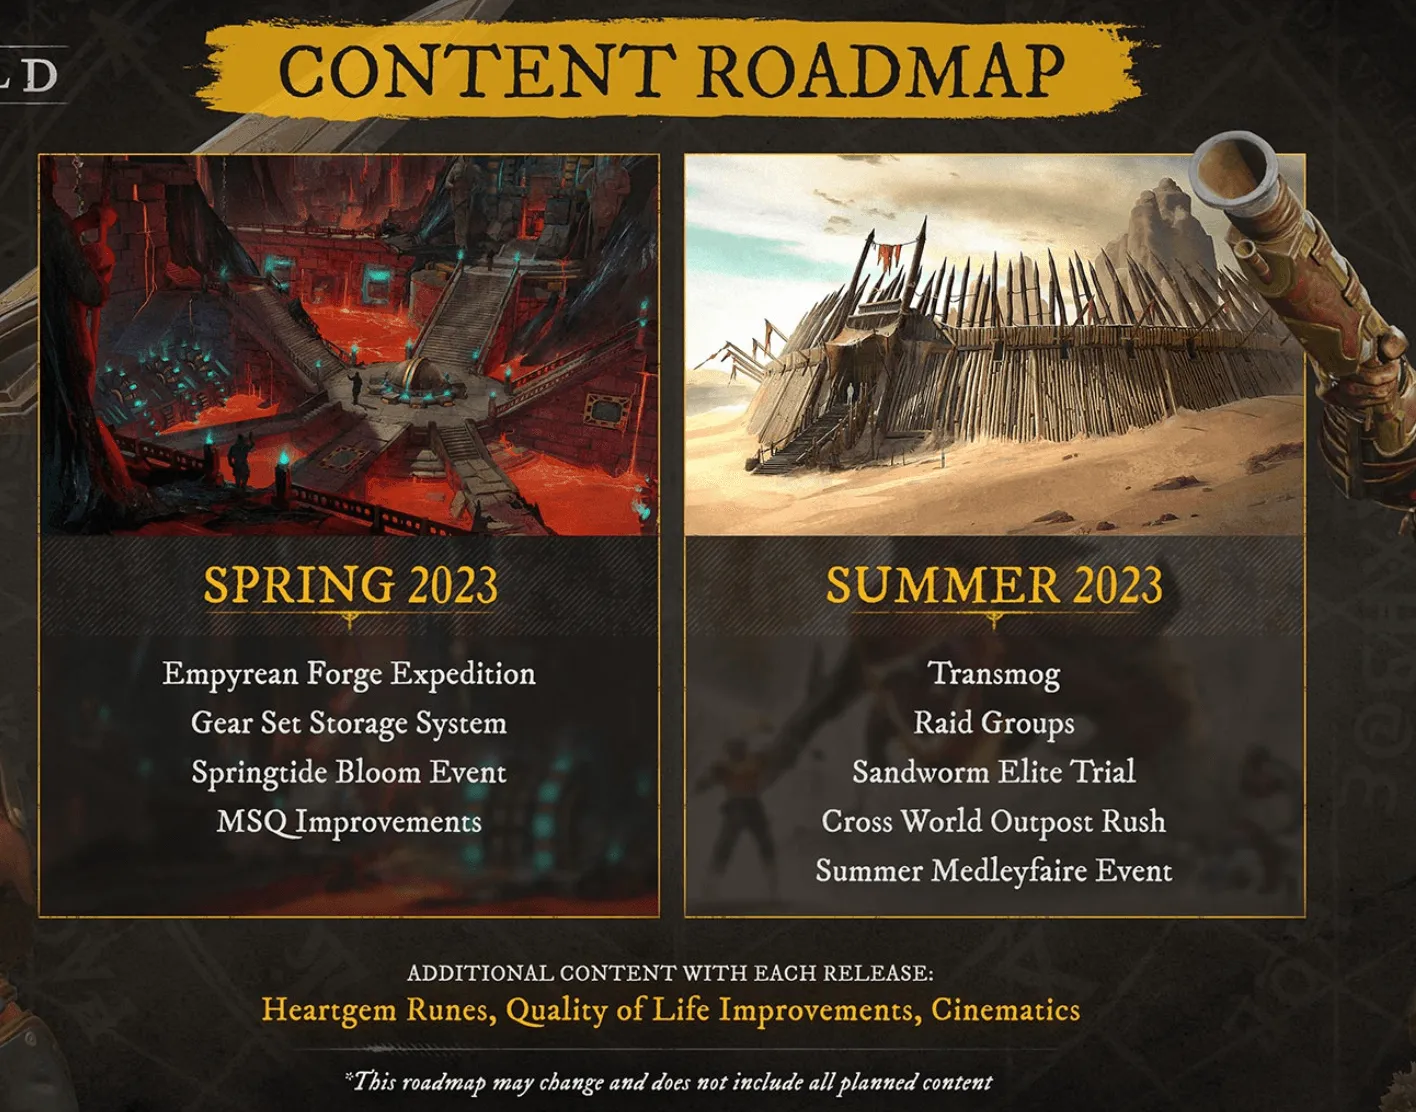 New World Roadmap - Spring 2023 and Summer 2023